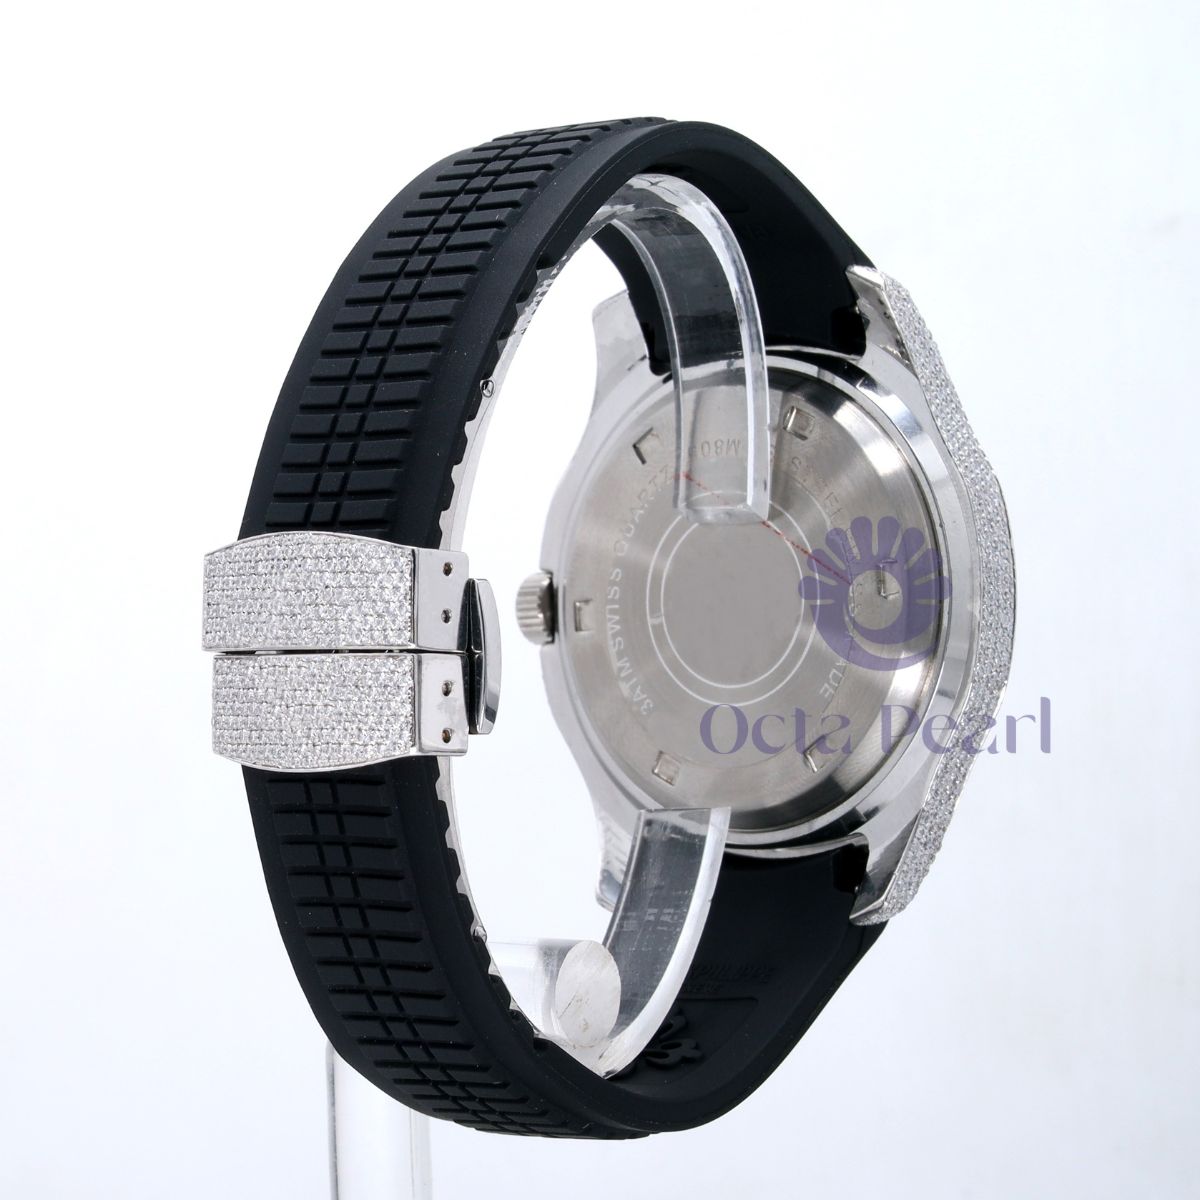 Round Moissanite Iced Out Stylish Black Silicon Strap Watch